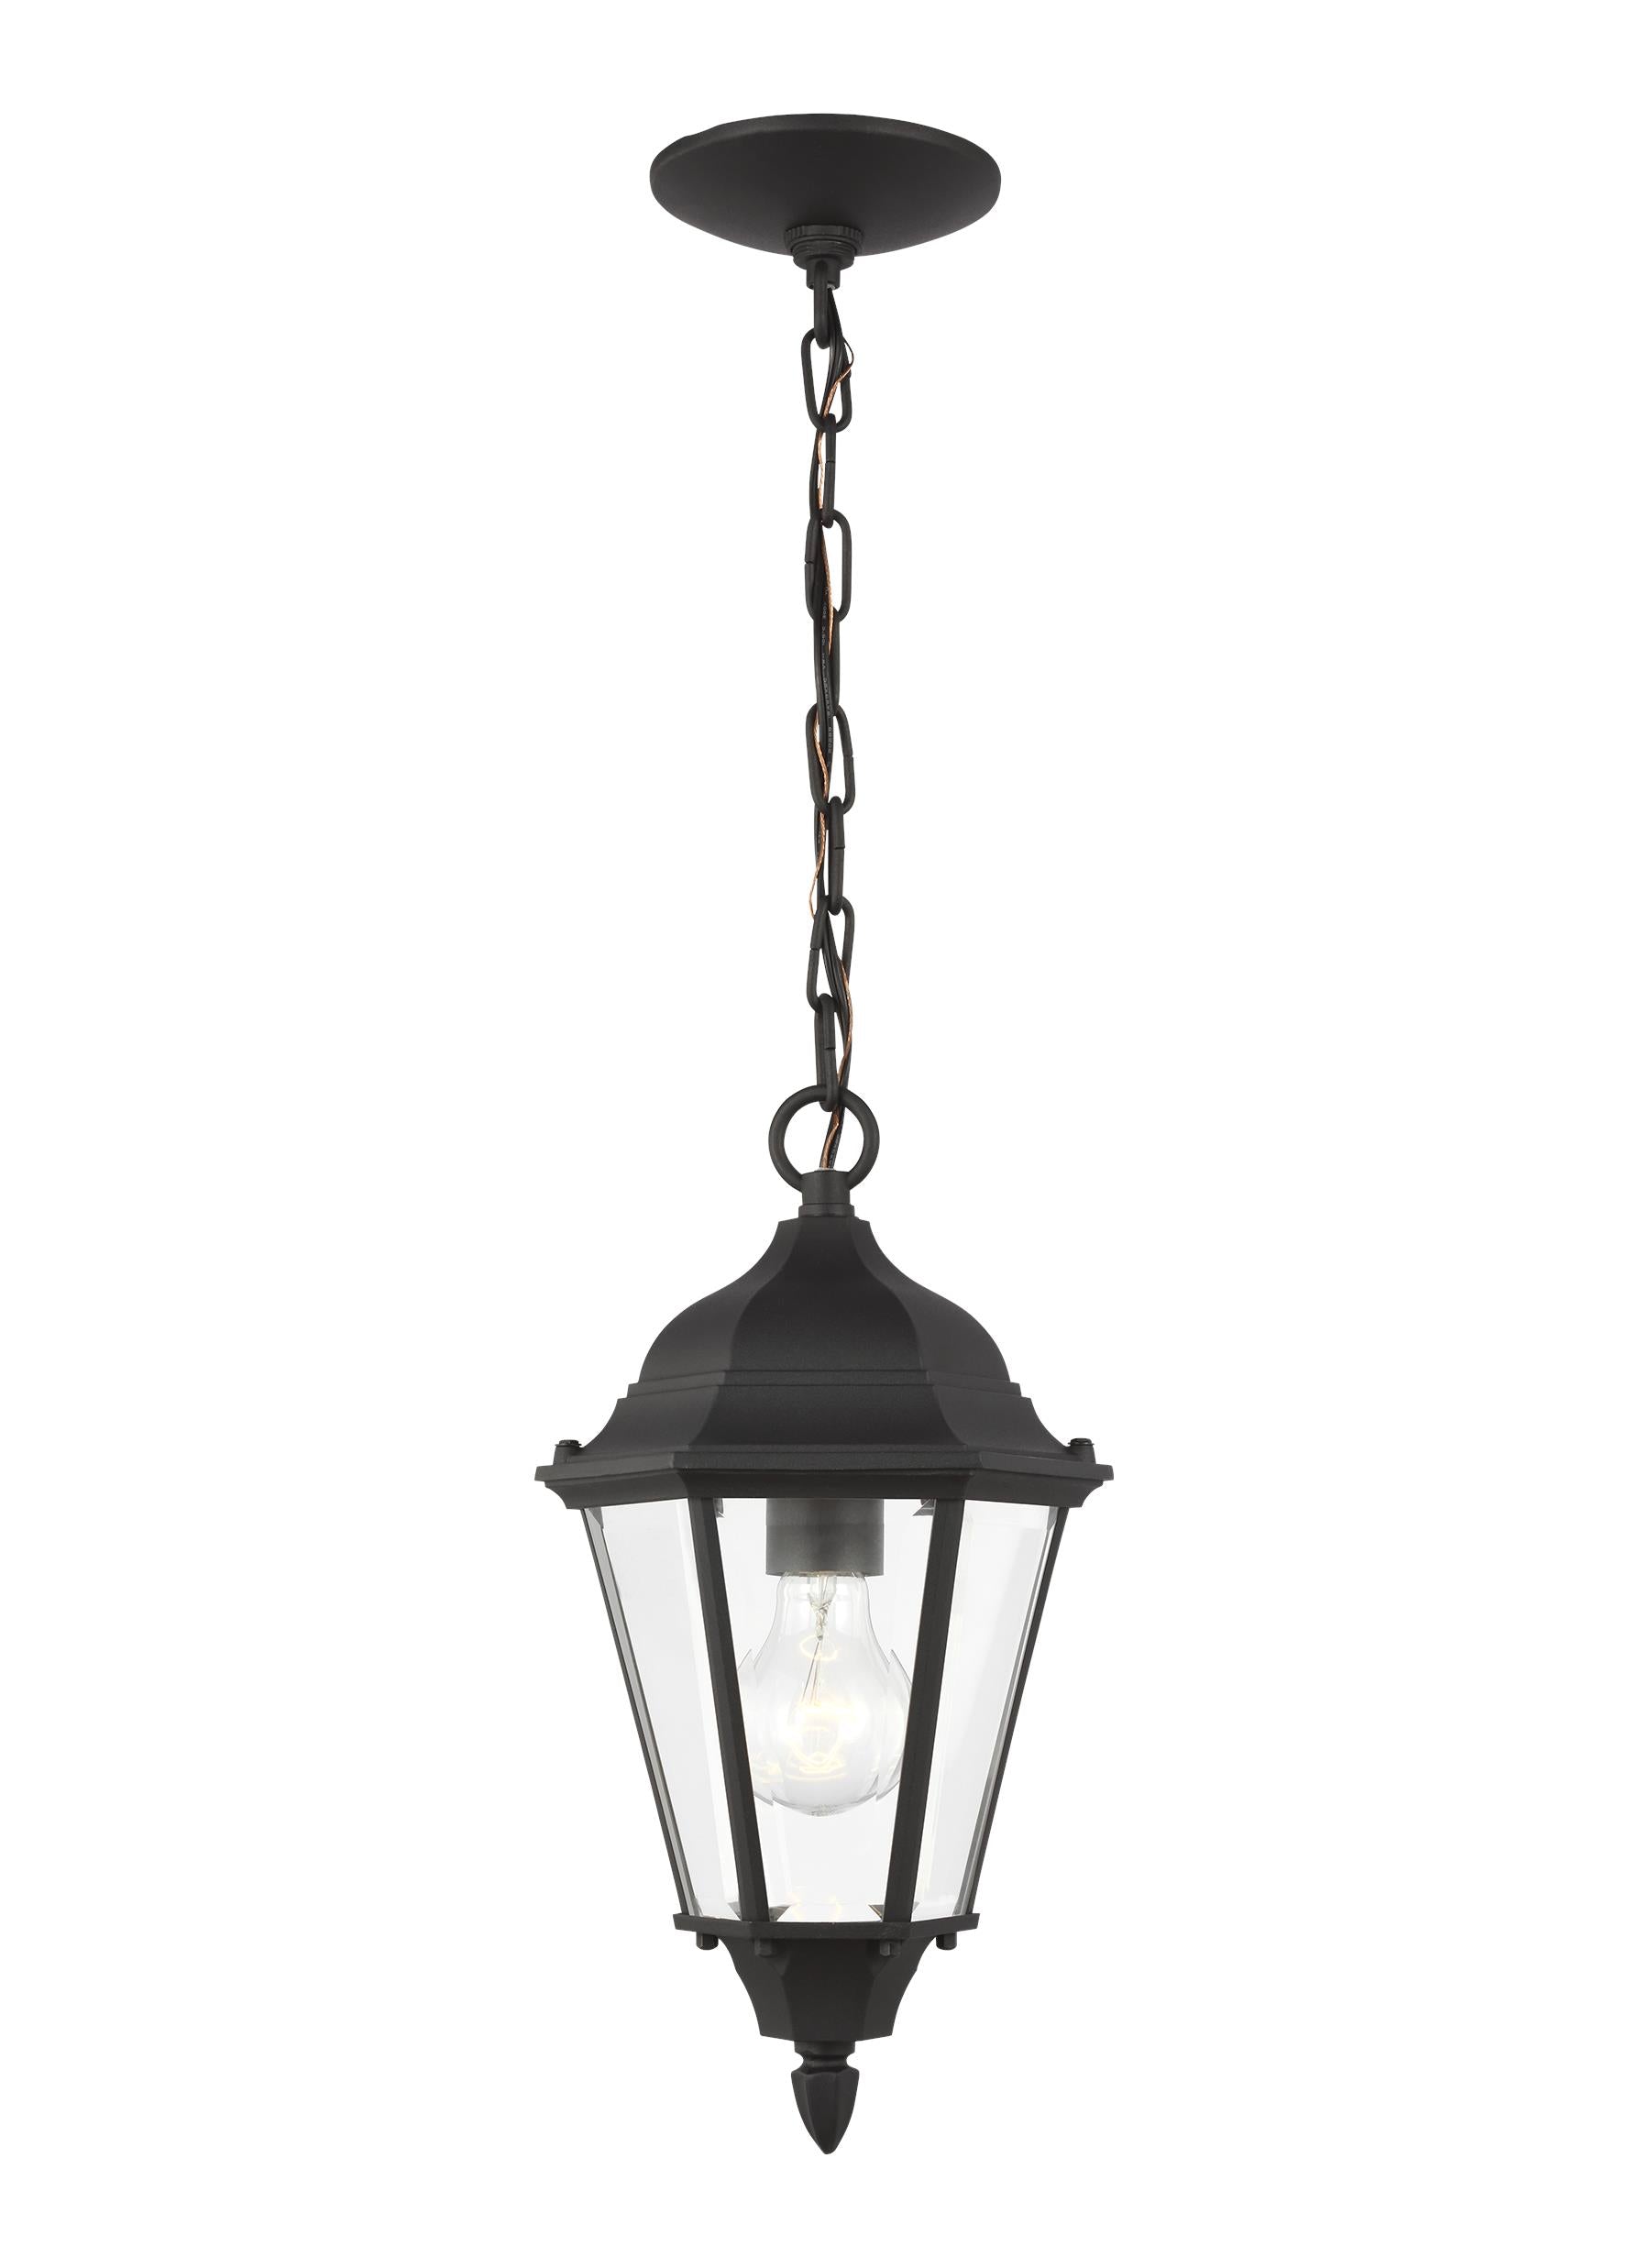 Bakersville traditional 1-light outdoor exterior pendant in black finish with clear beveled glass panels